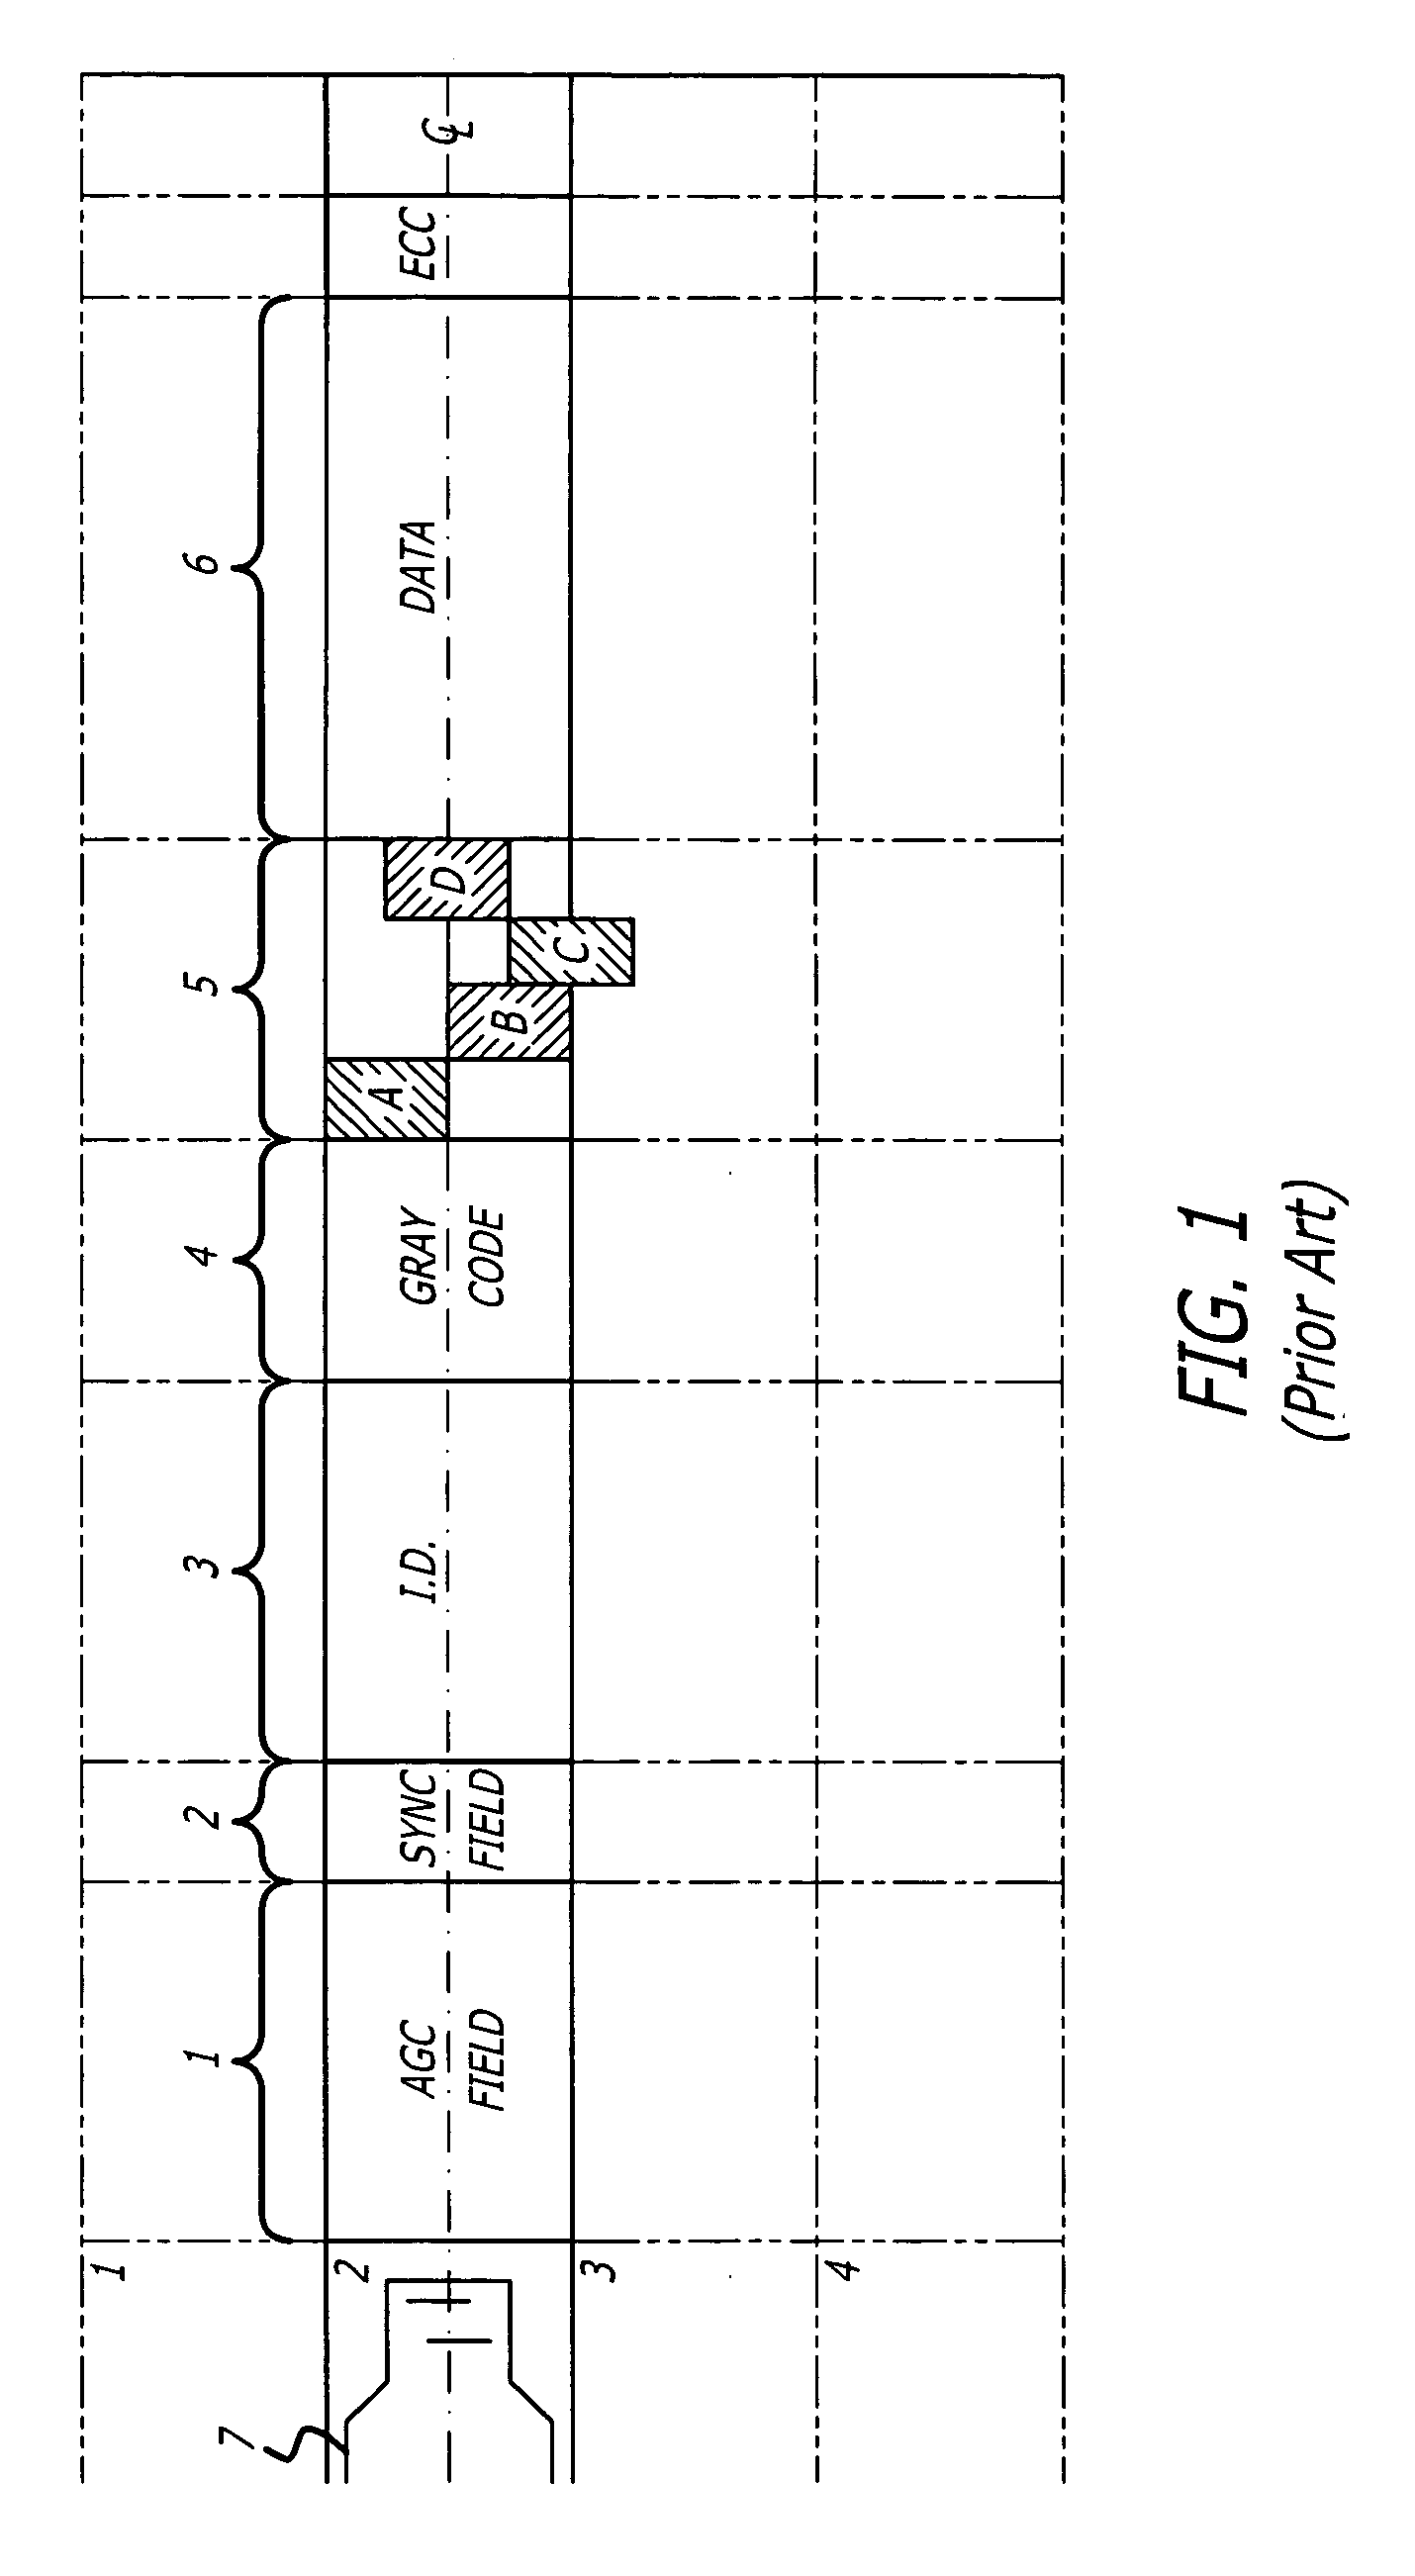 Method to control spiral start point during ammonite servo track writer process using reference servo track band